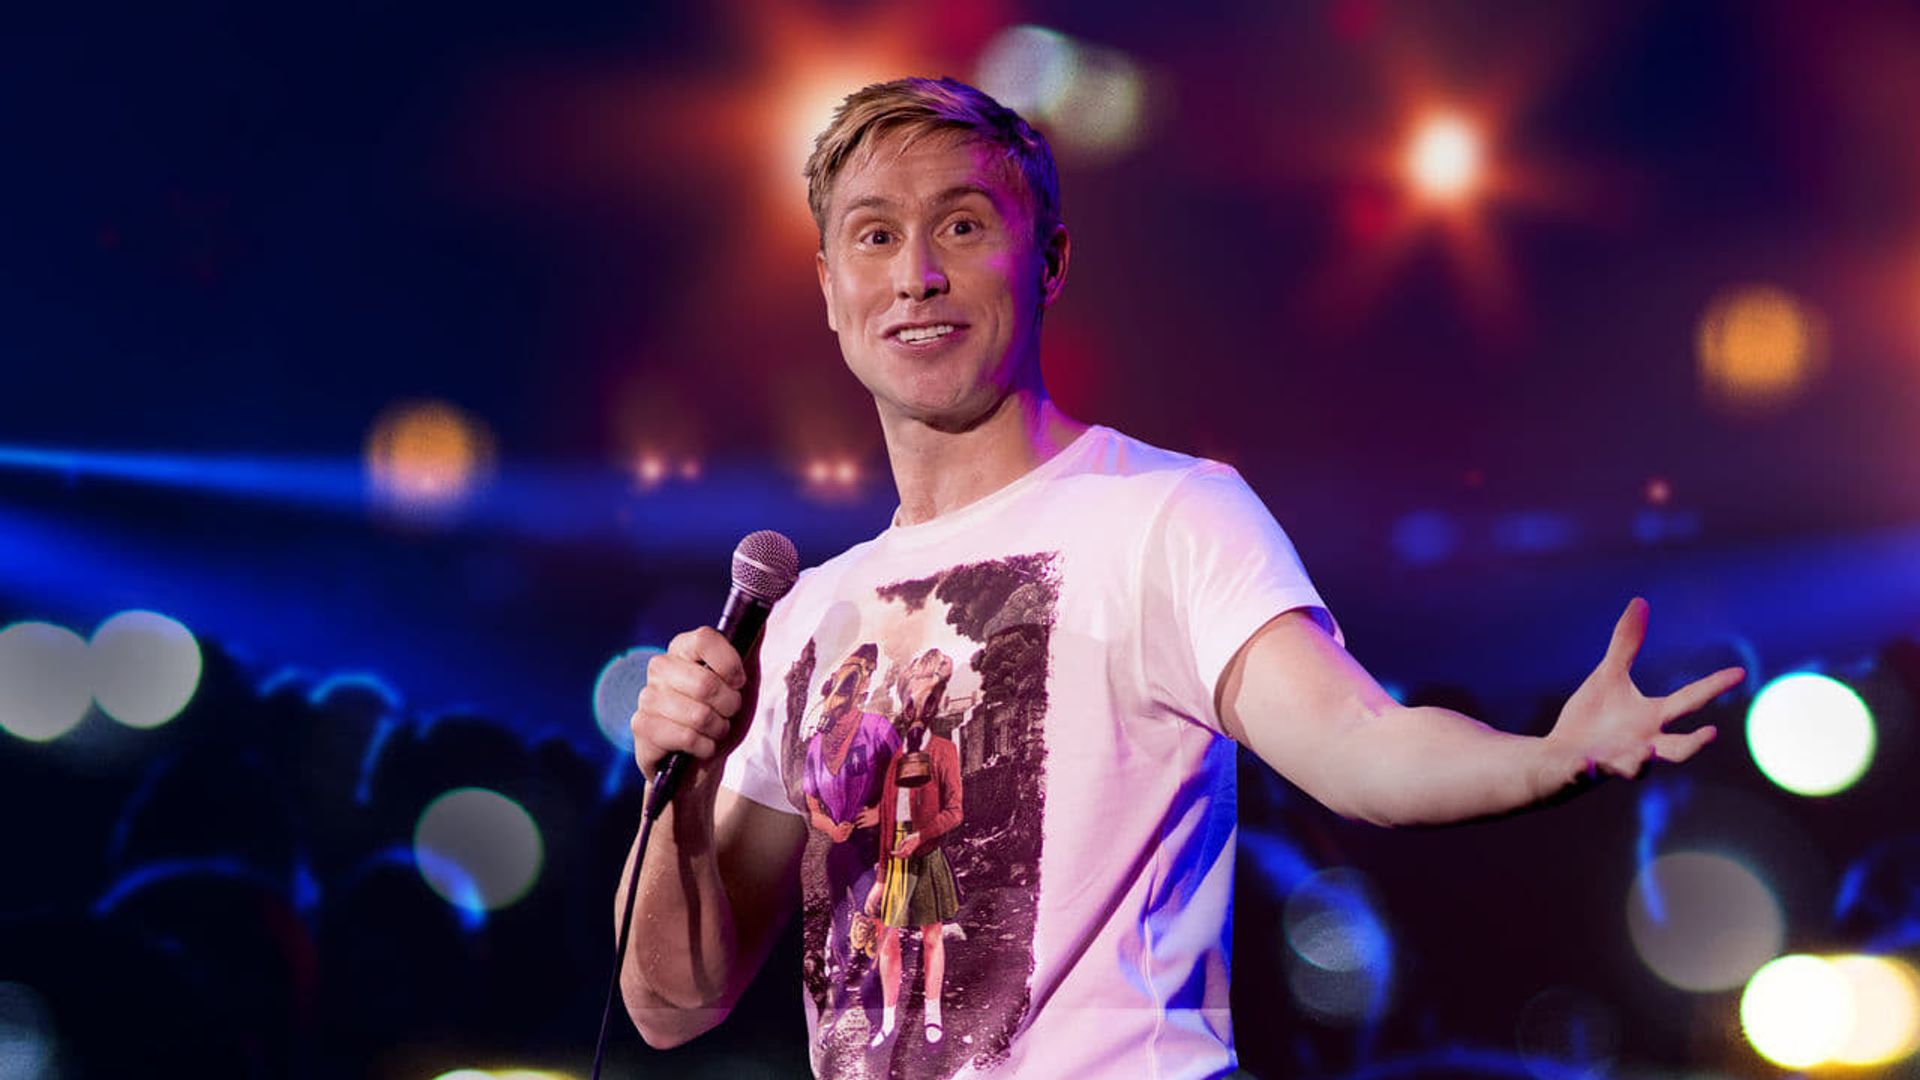 Russell Howard: Recalibrate background